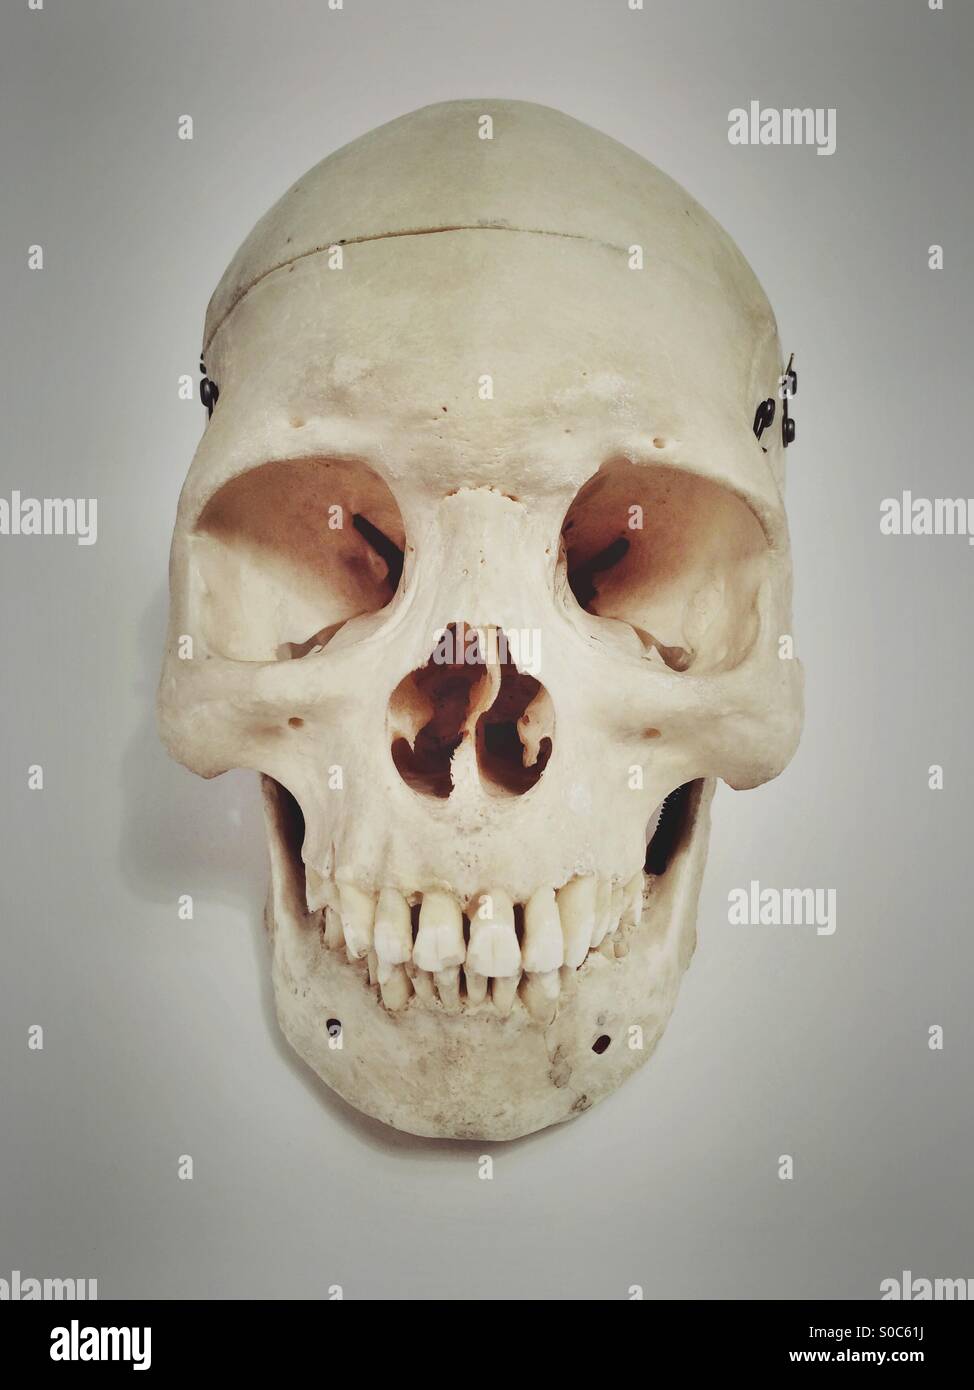 Human skull front view Stock Photo